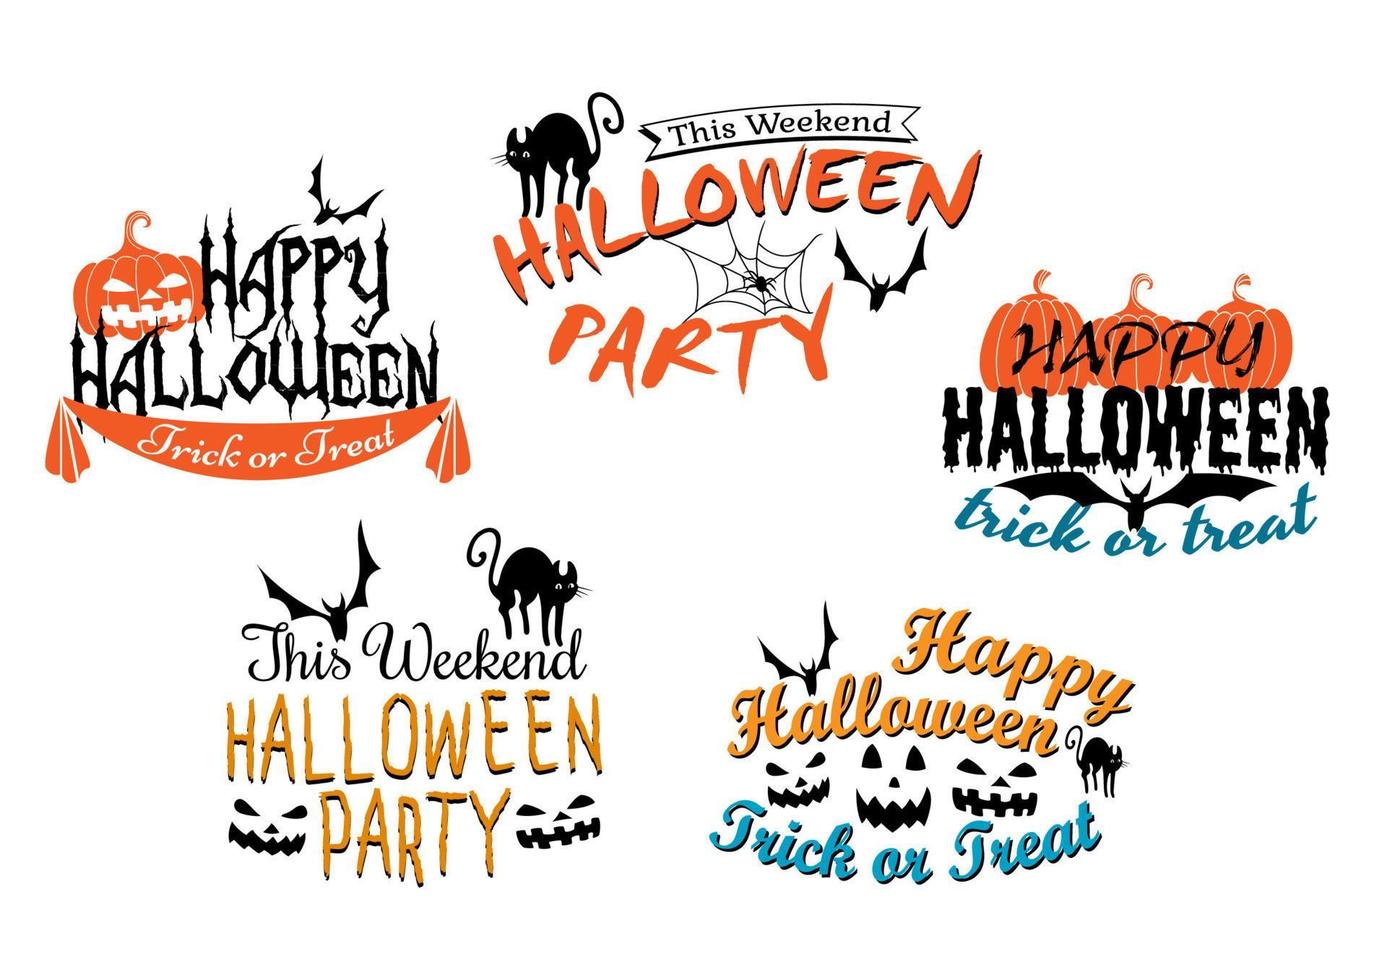 Halloween holiday party posters and banners vector